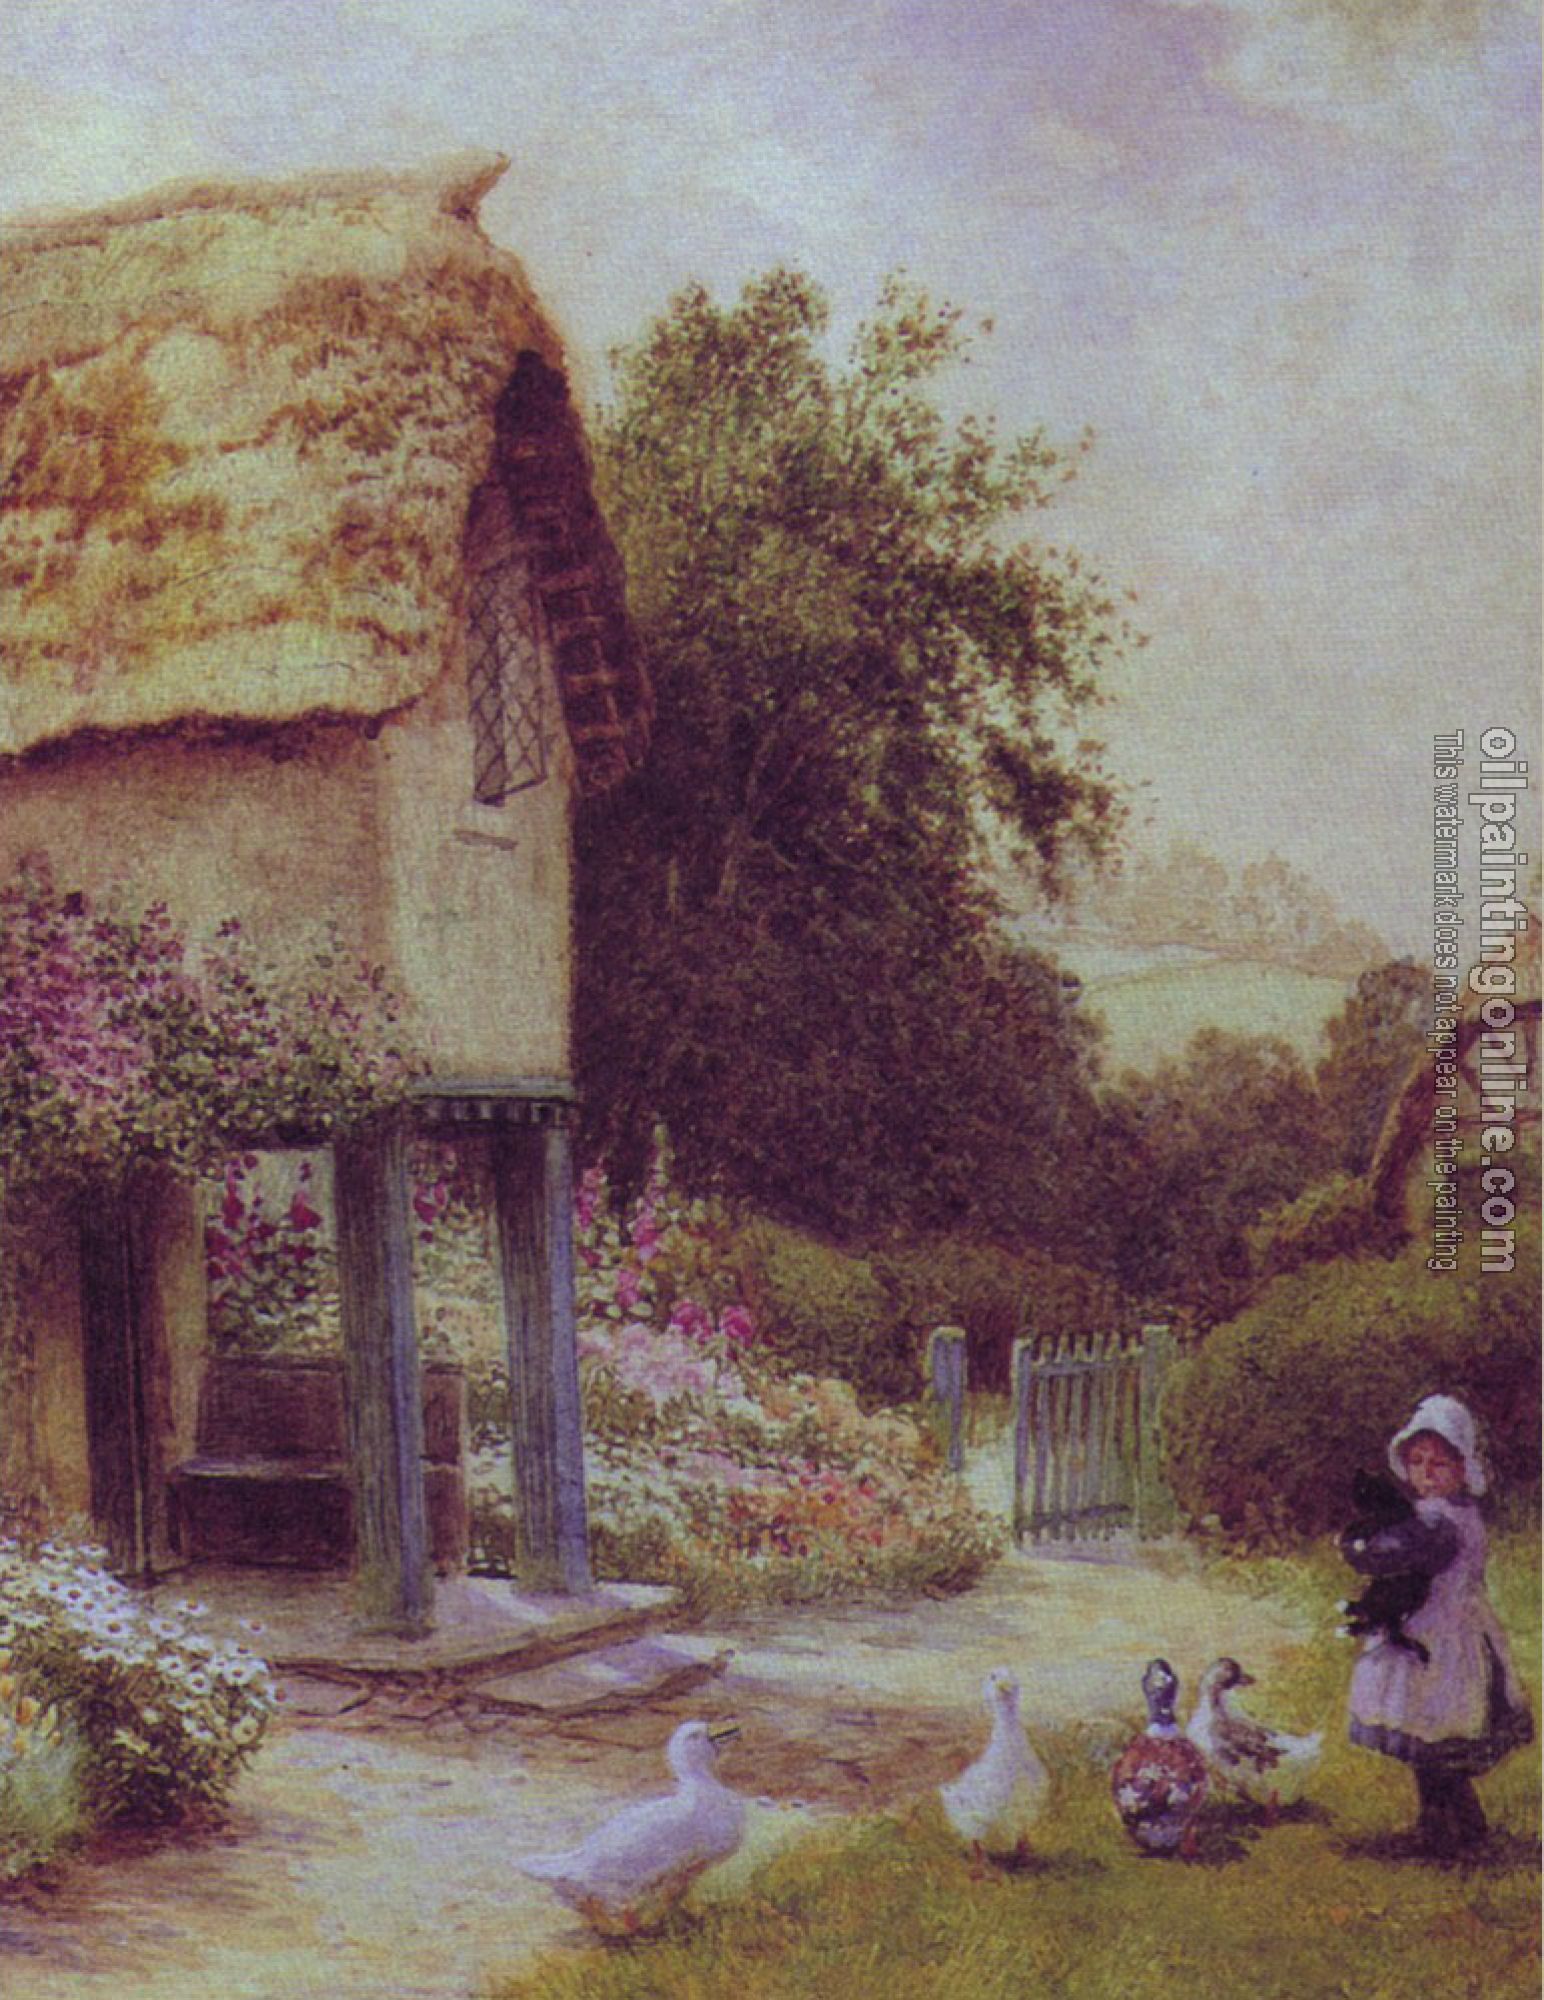 Oil Painting Reproduction - A picturesque cottage garden